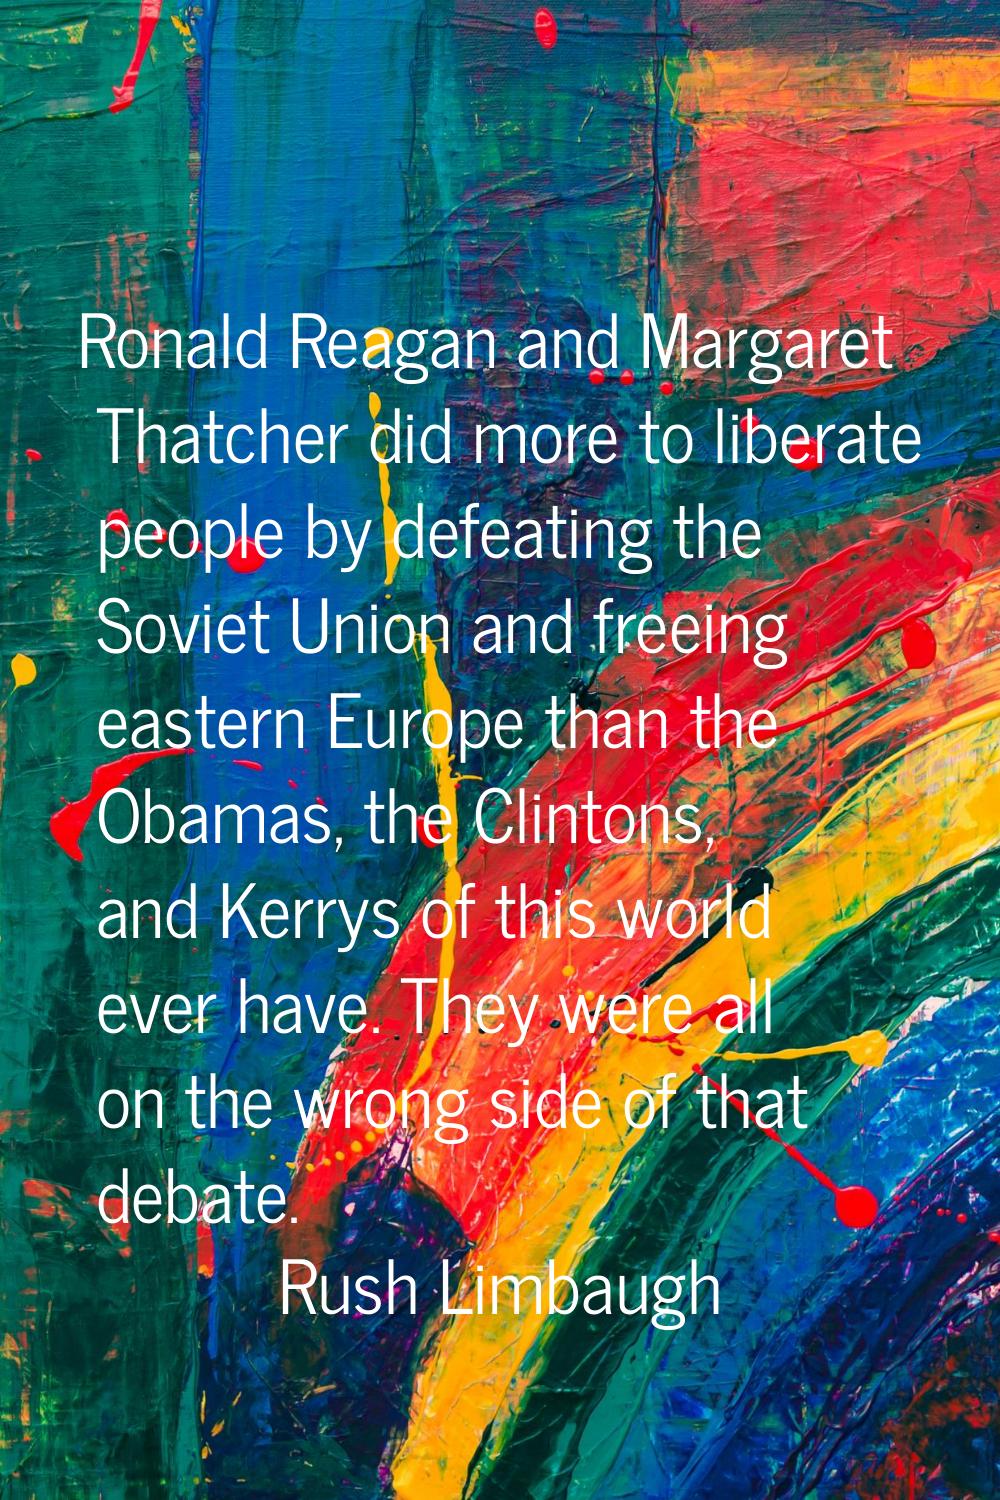 Ronald Reagan and Margaret Thatcher did more to liberate people by defeating the Soviet Union and f